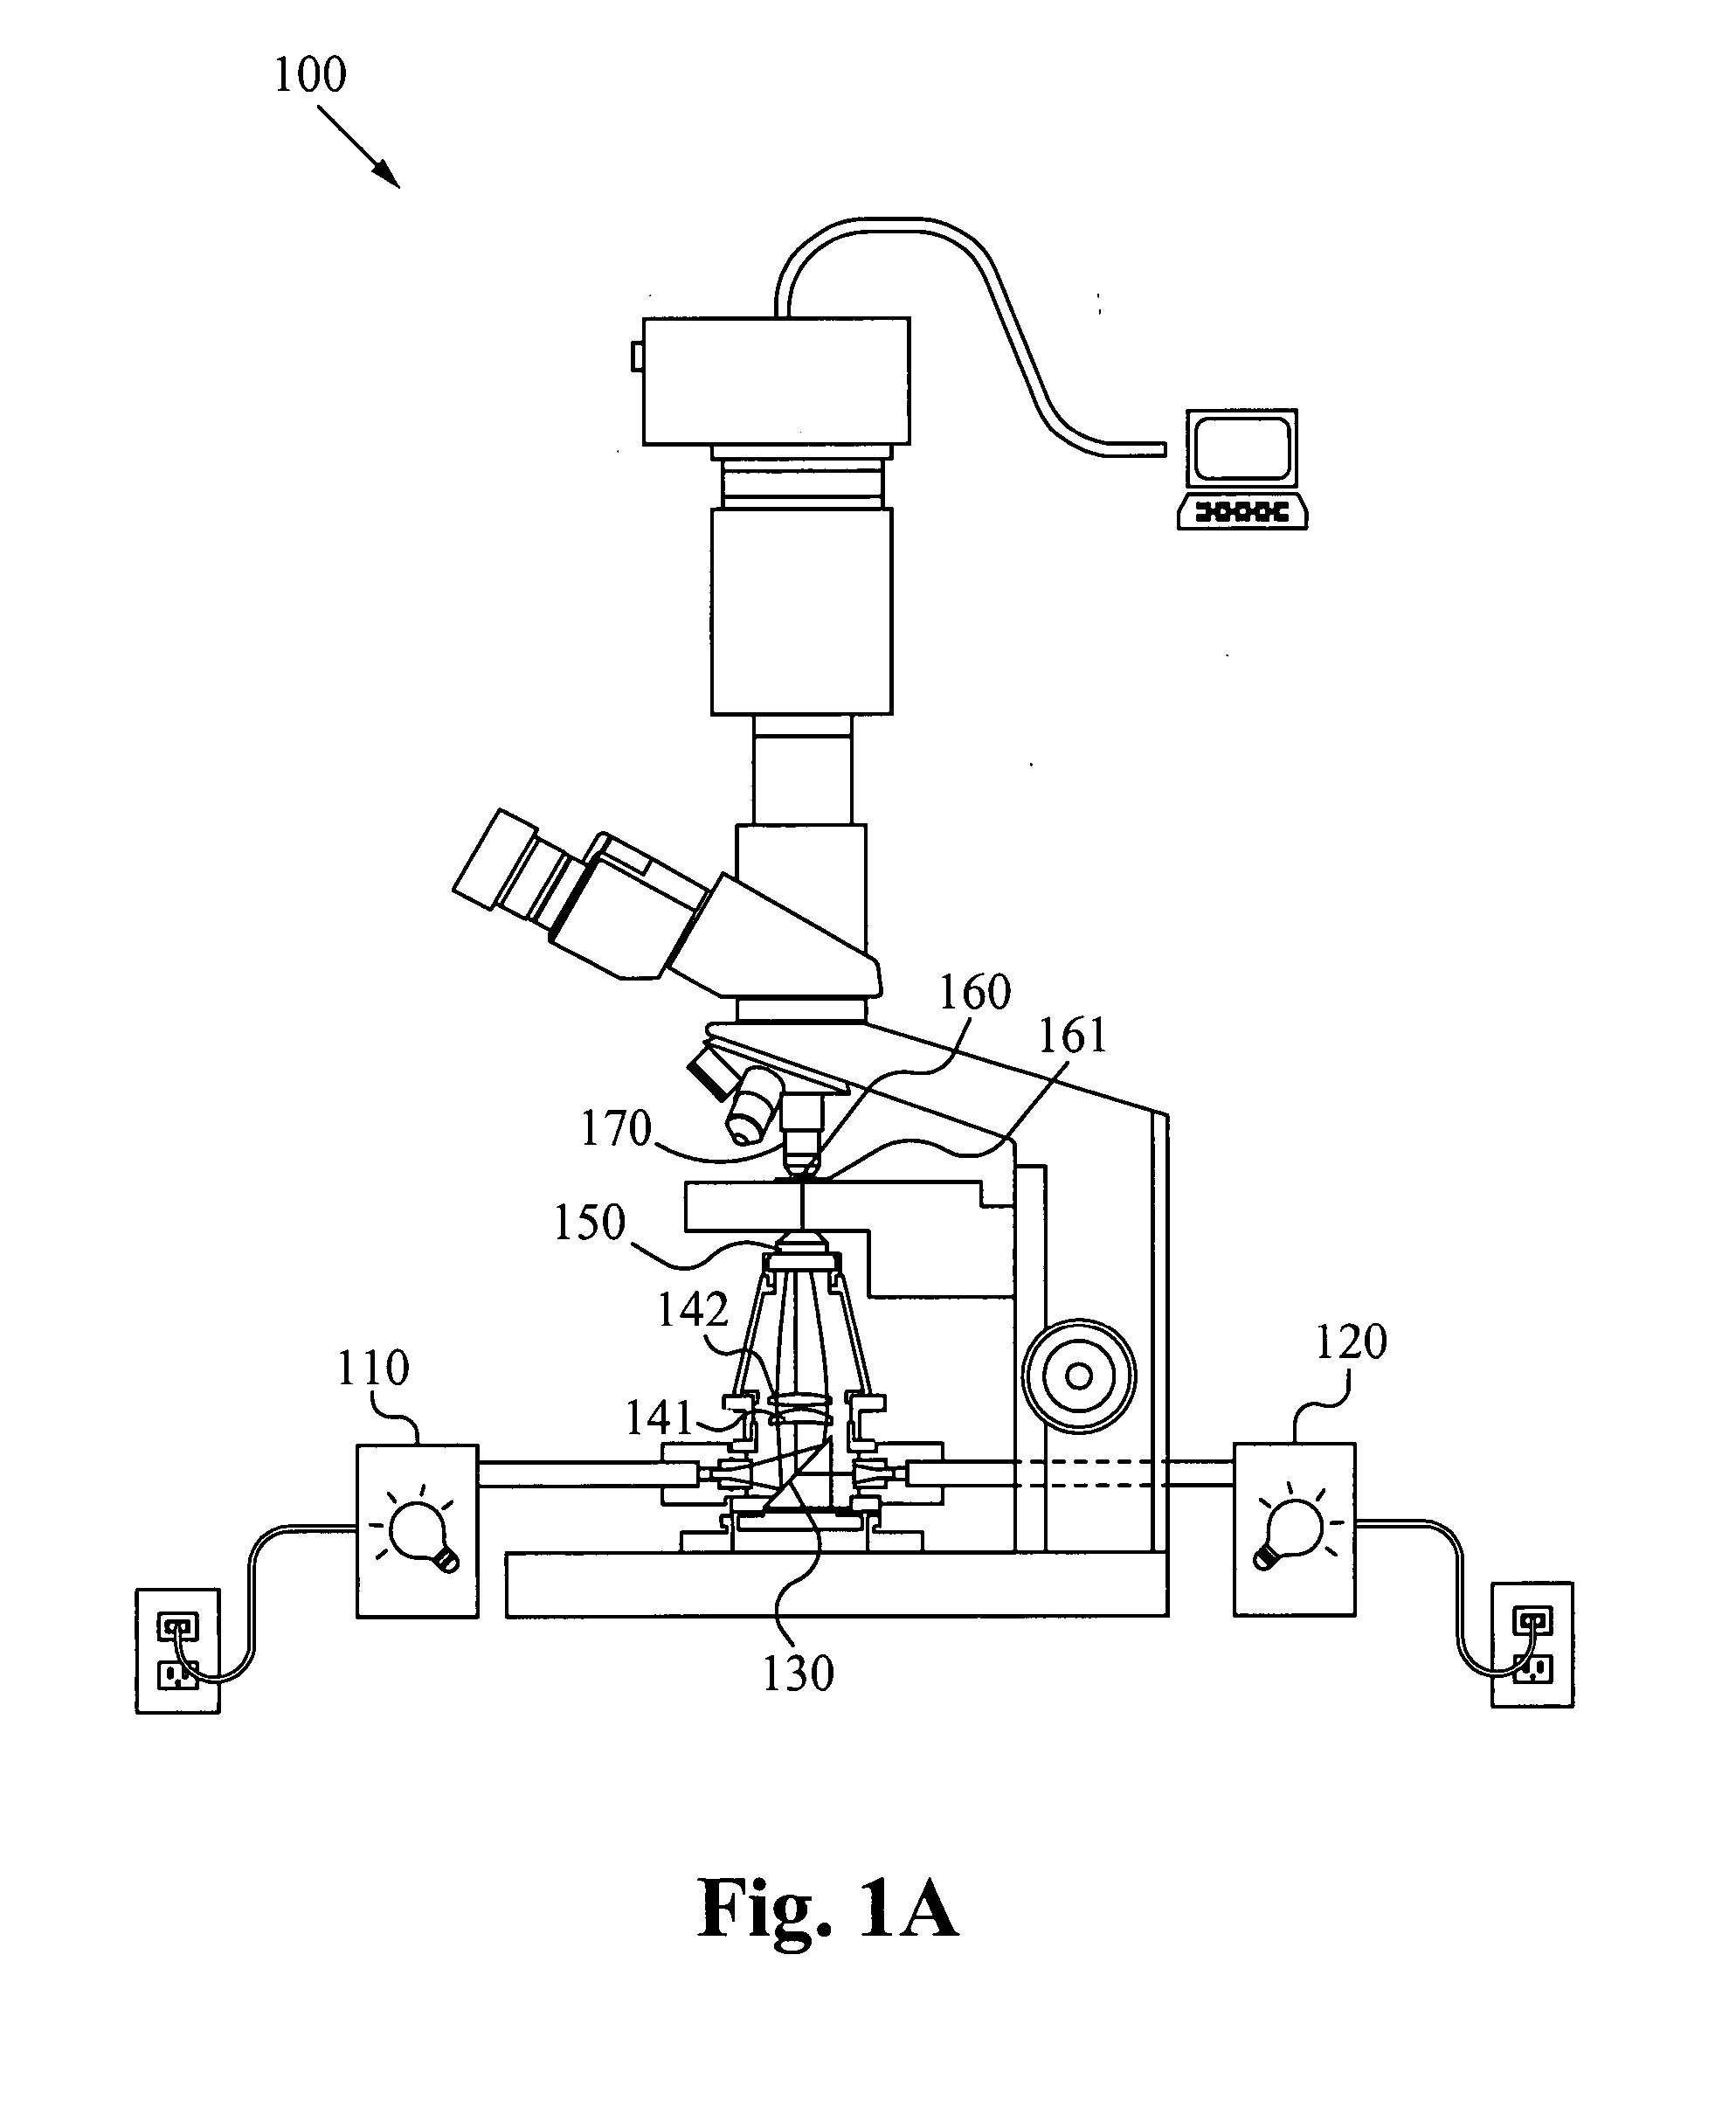 Applications for mixing and combining light utilizing a transmission filter, iris, aperture apparatus